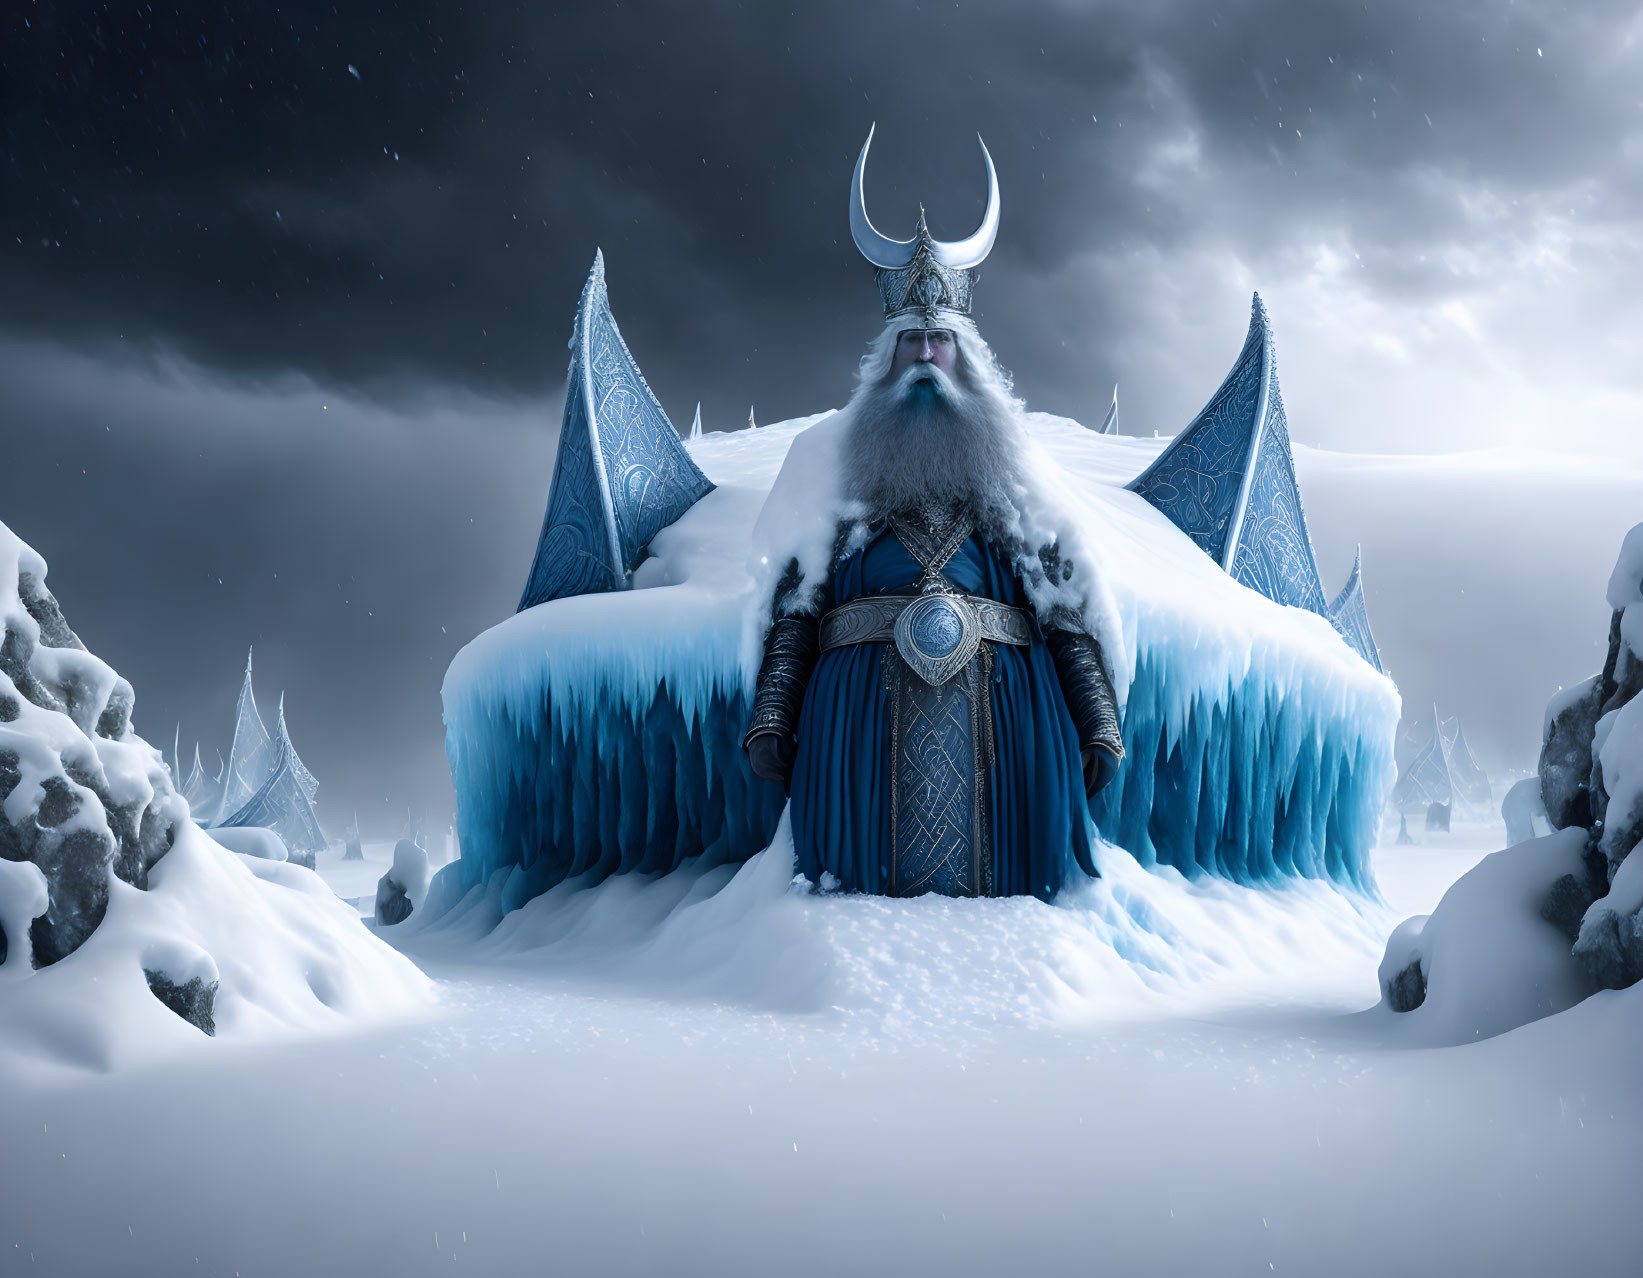 Viking figure in majestic attire amid icy structures under dark sky